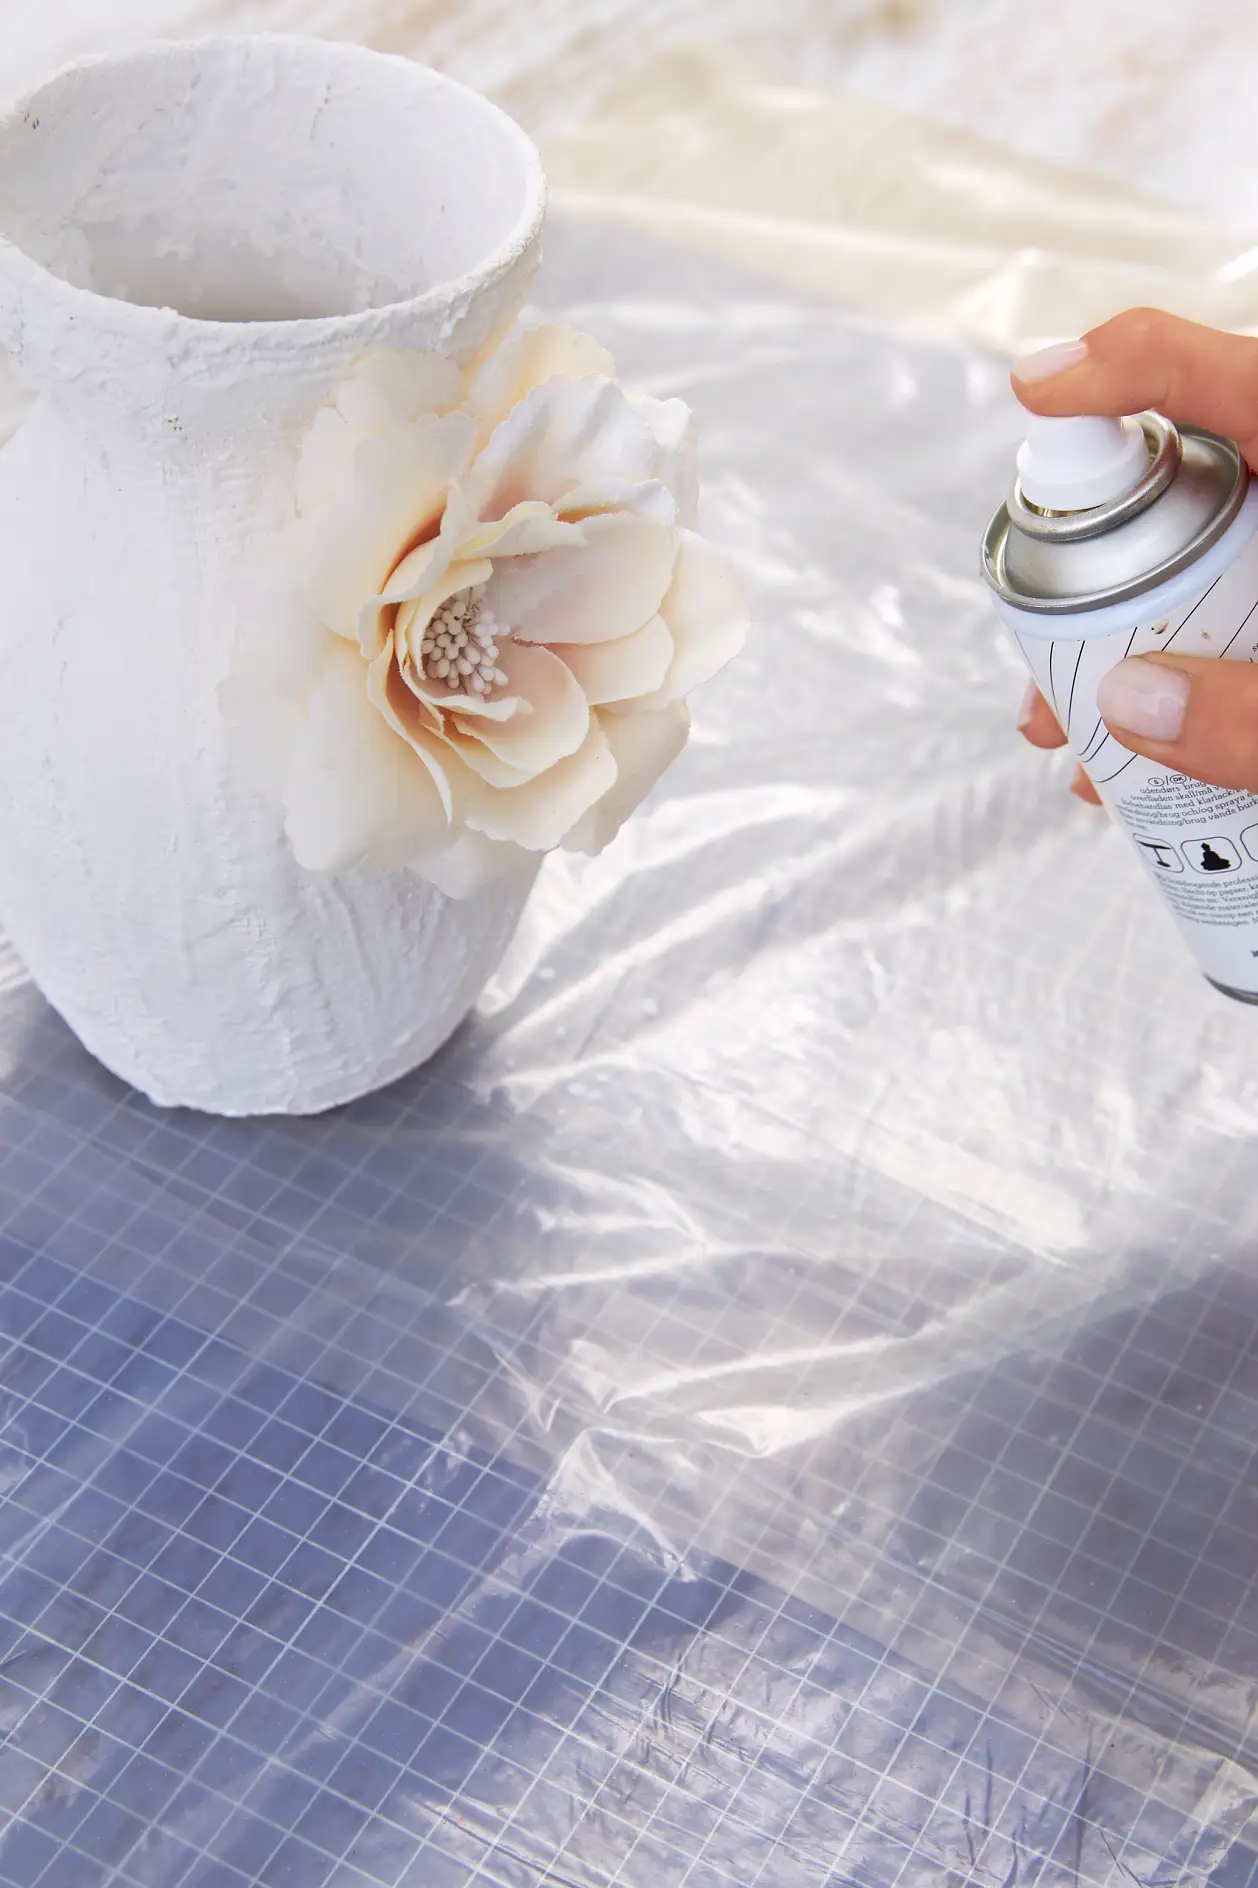 Once all is well dried up, finish the vase with white spray paint.